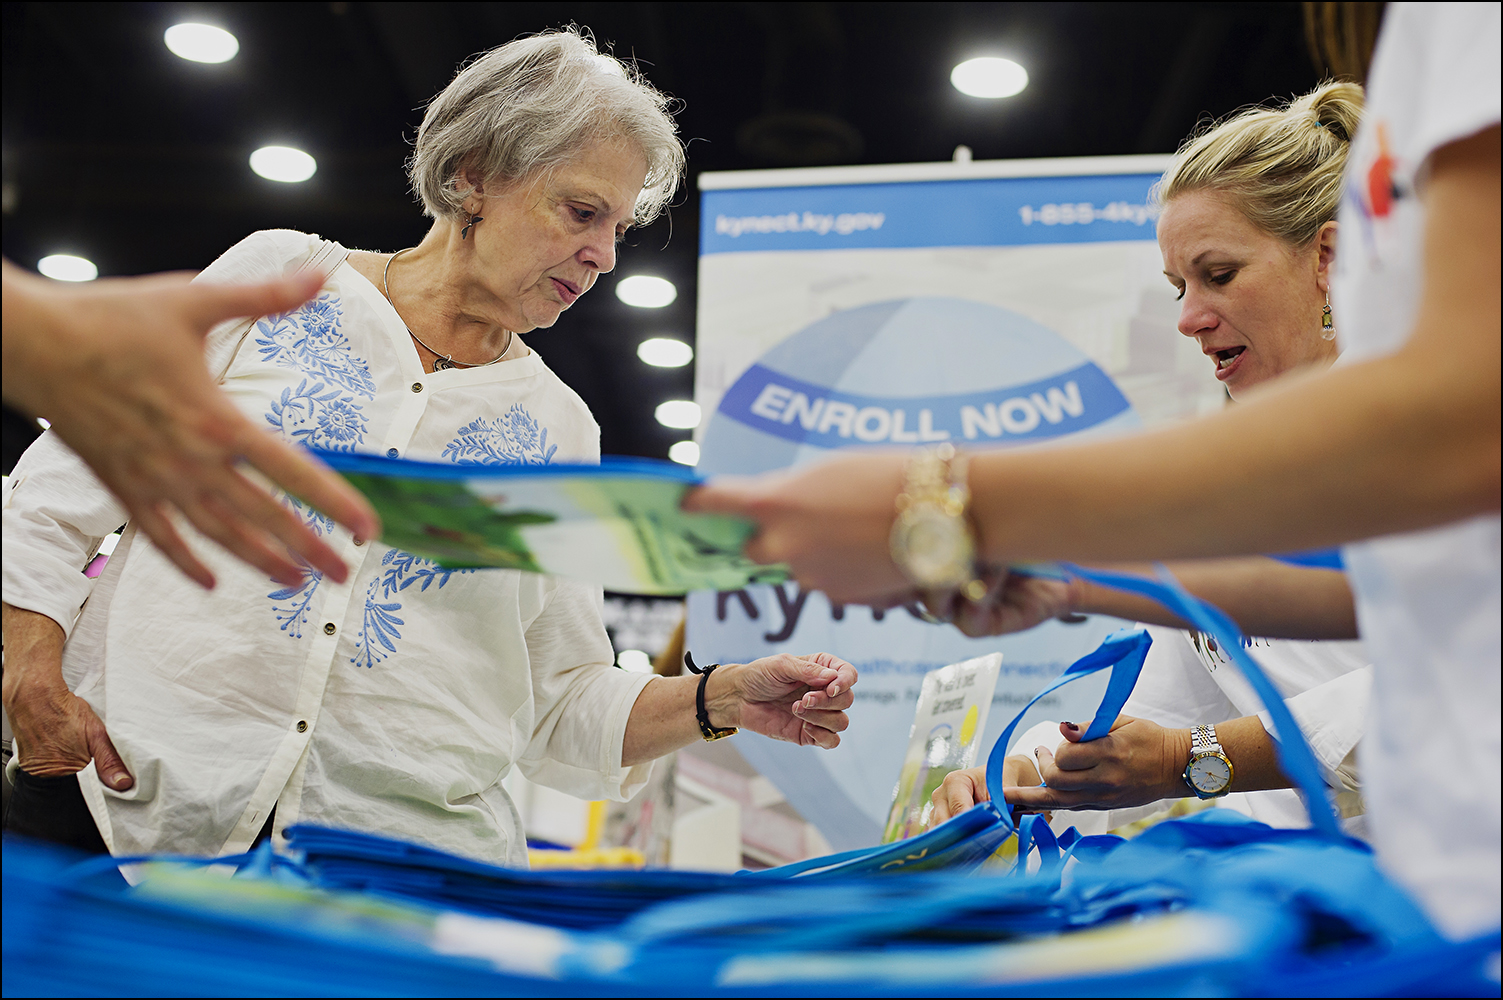  Jean Varble, 65, from Louisville, left, picks up information on the Affordable Health Care Act from the Kynect booth at the Kentucky State Fair in Louisville, KY on Thursday, August 21, 2014. Varble said that while she and her husband have a pension